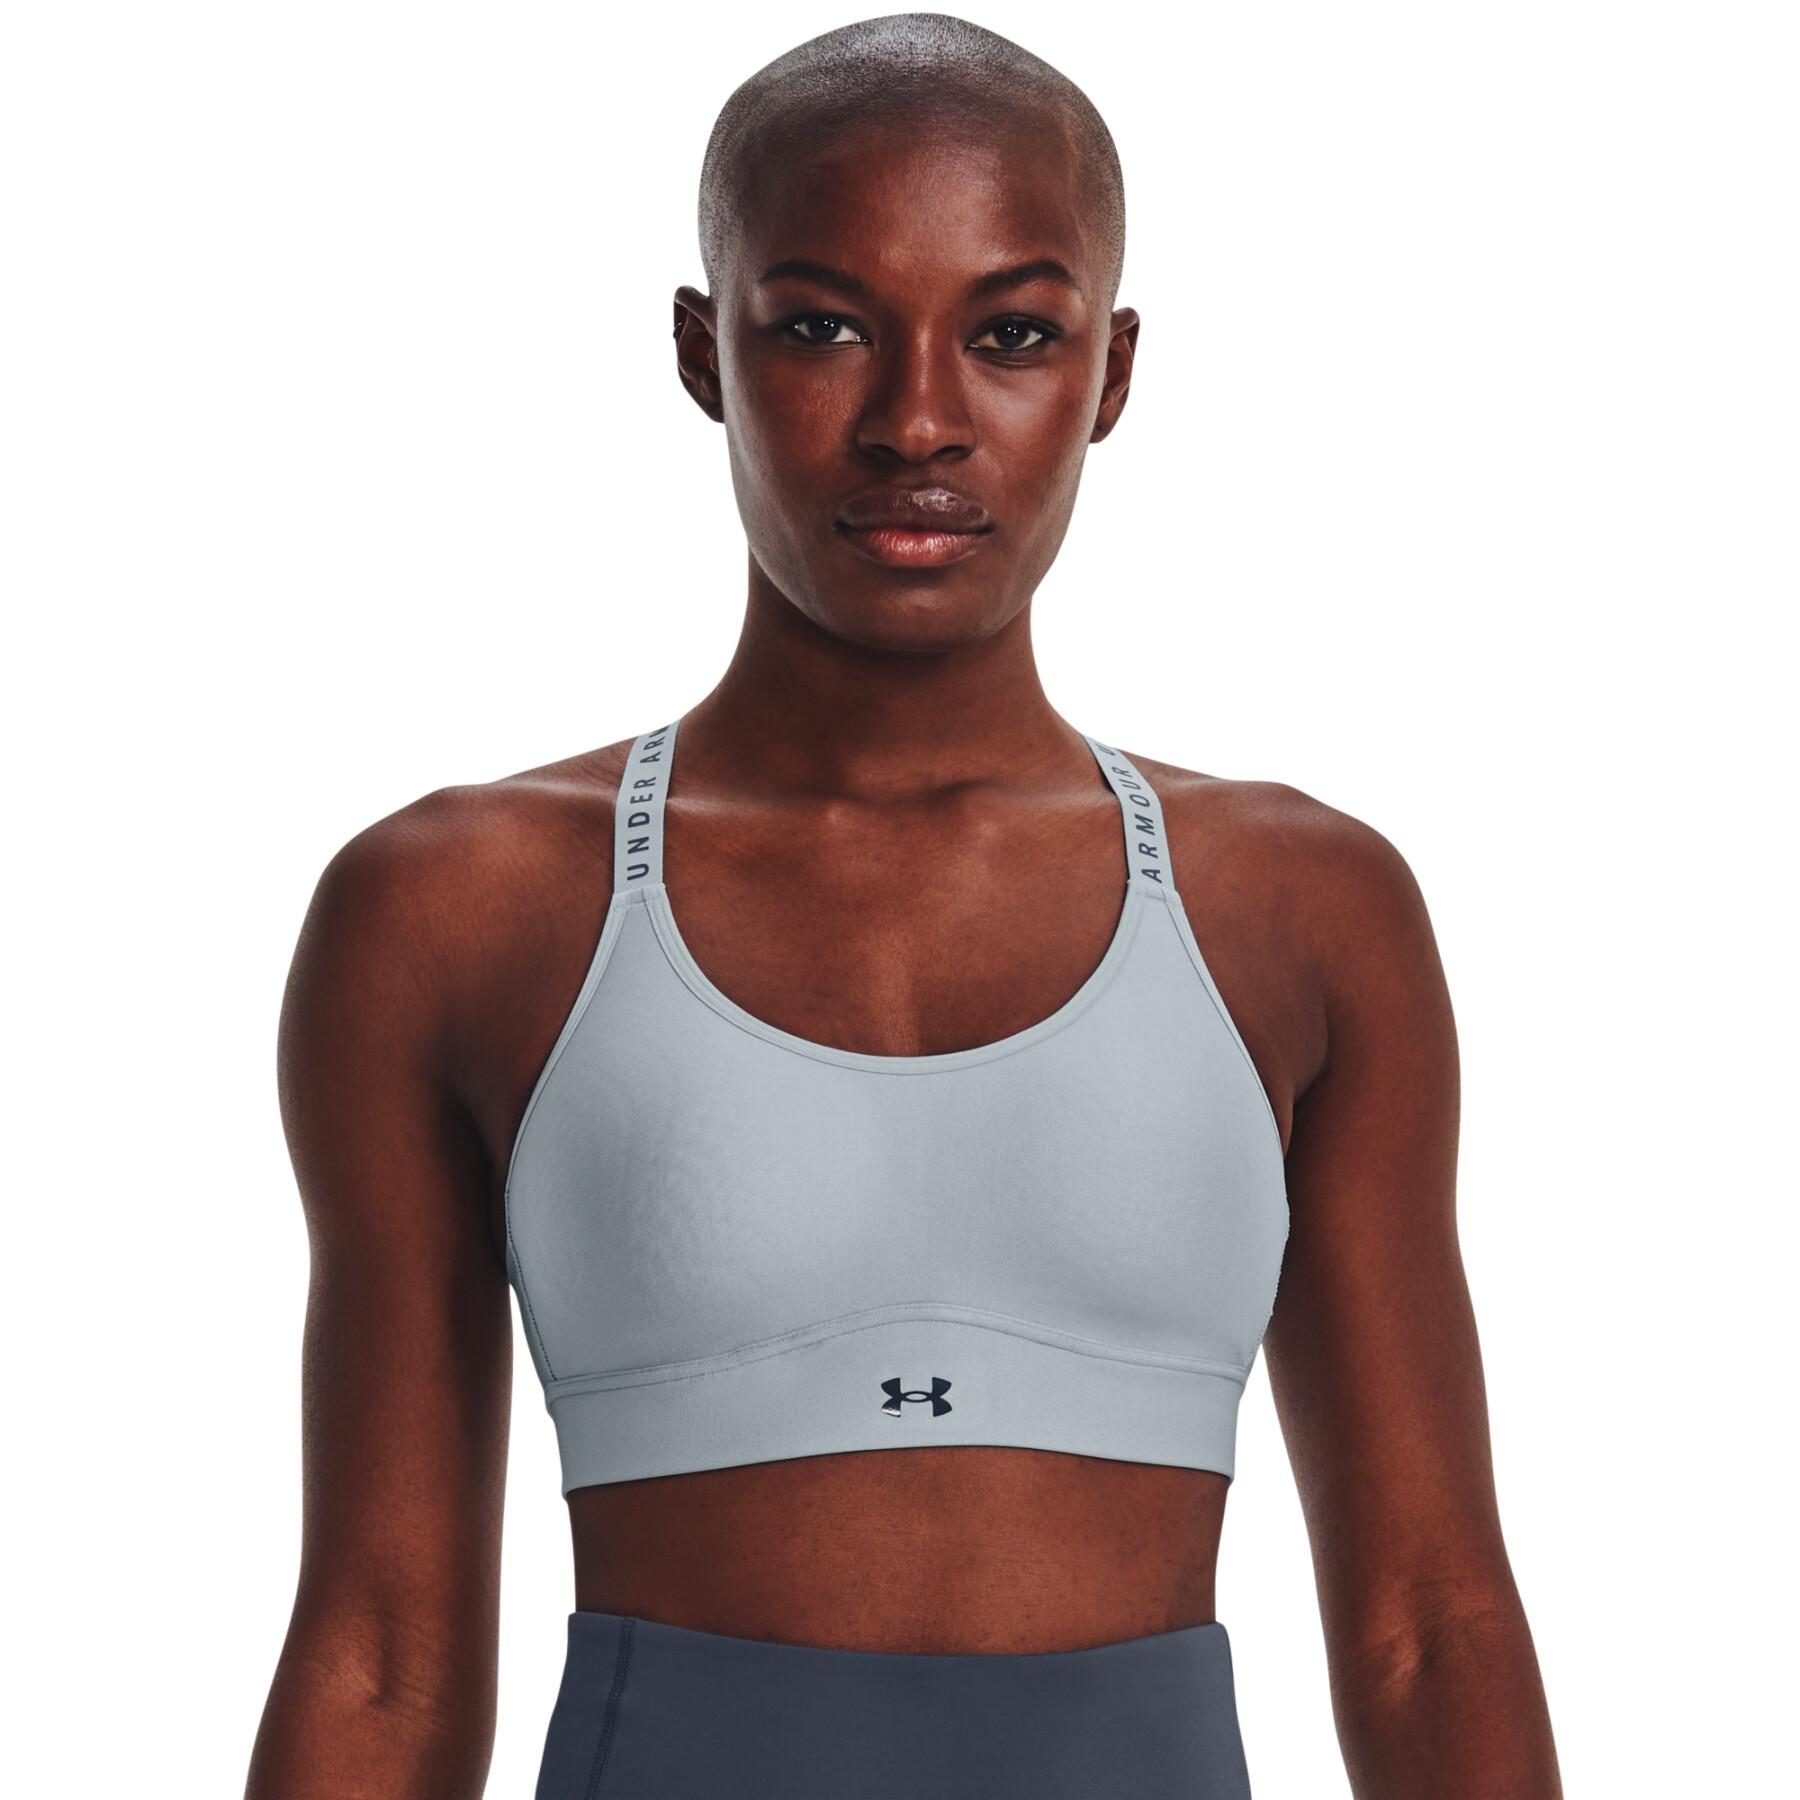 High support bra for women Under Armour Infinity - Bras - Women's clothing  - Fitness